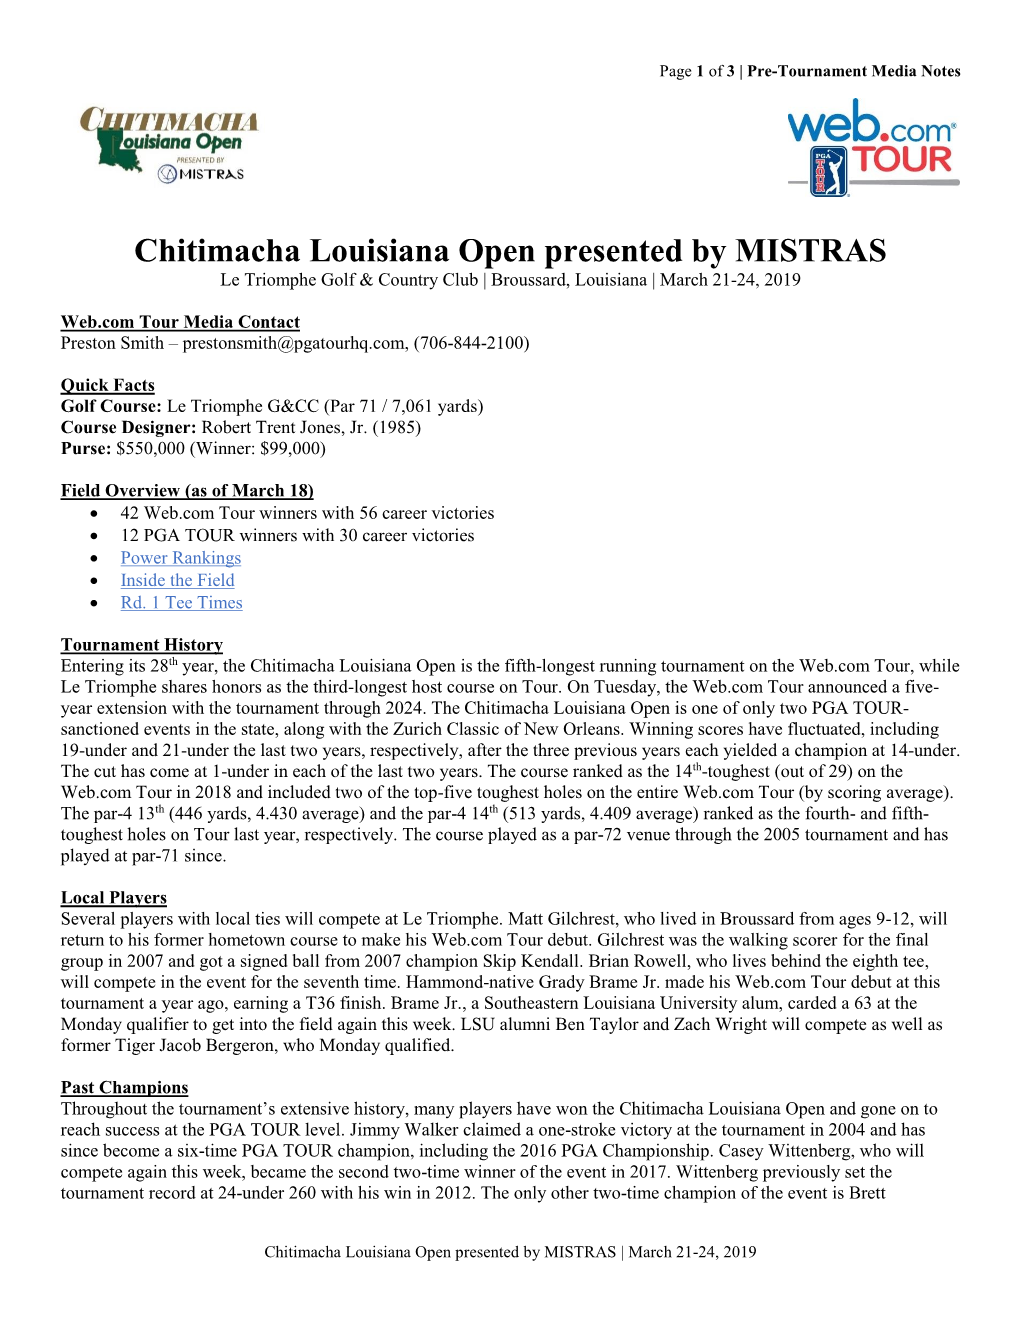 Chitimacha Louisiana Open Presented by MISTRAS Le Triomphe Golf & Country Club | Broussard, Louisiana | March 21-24, 2019